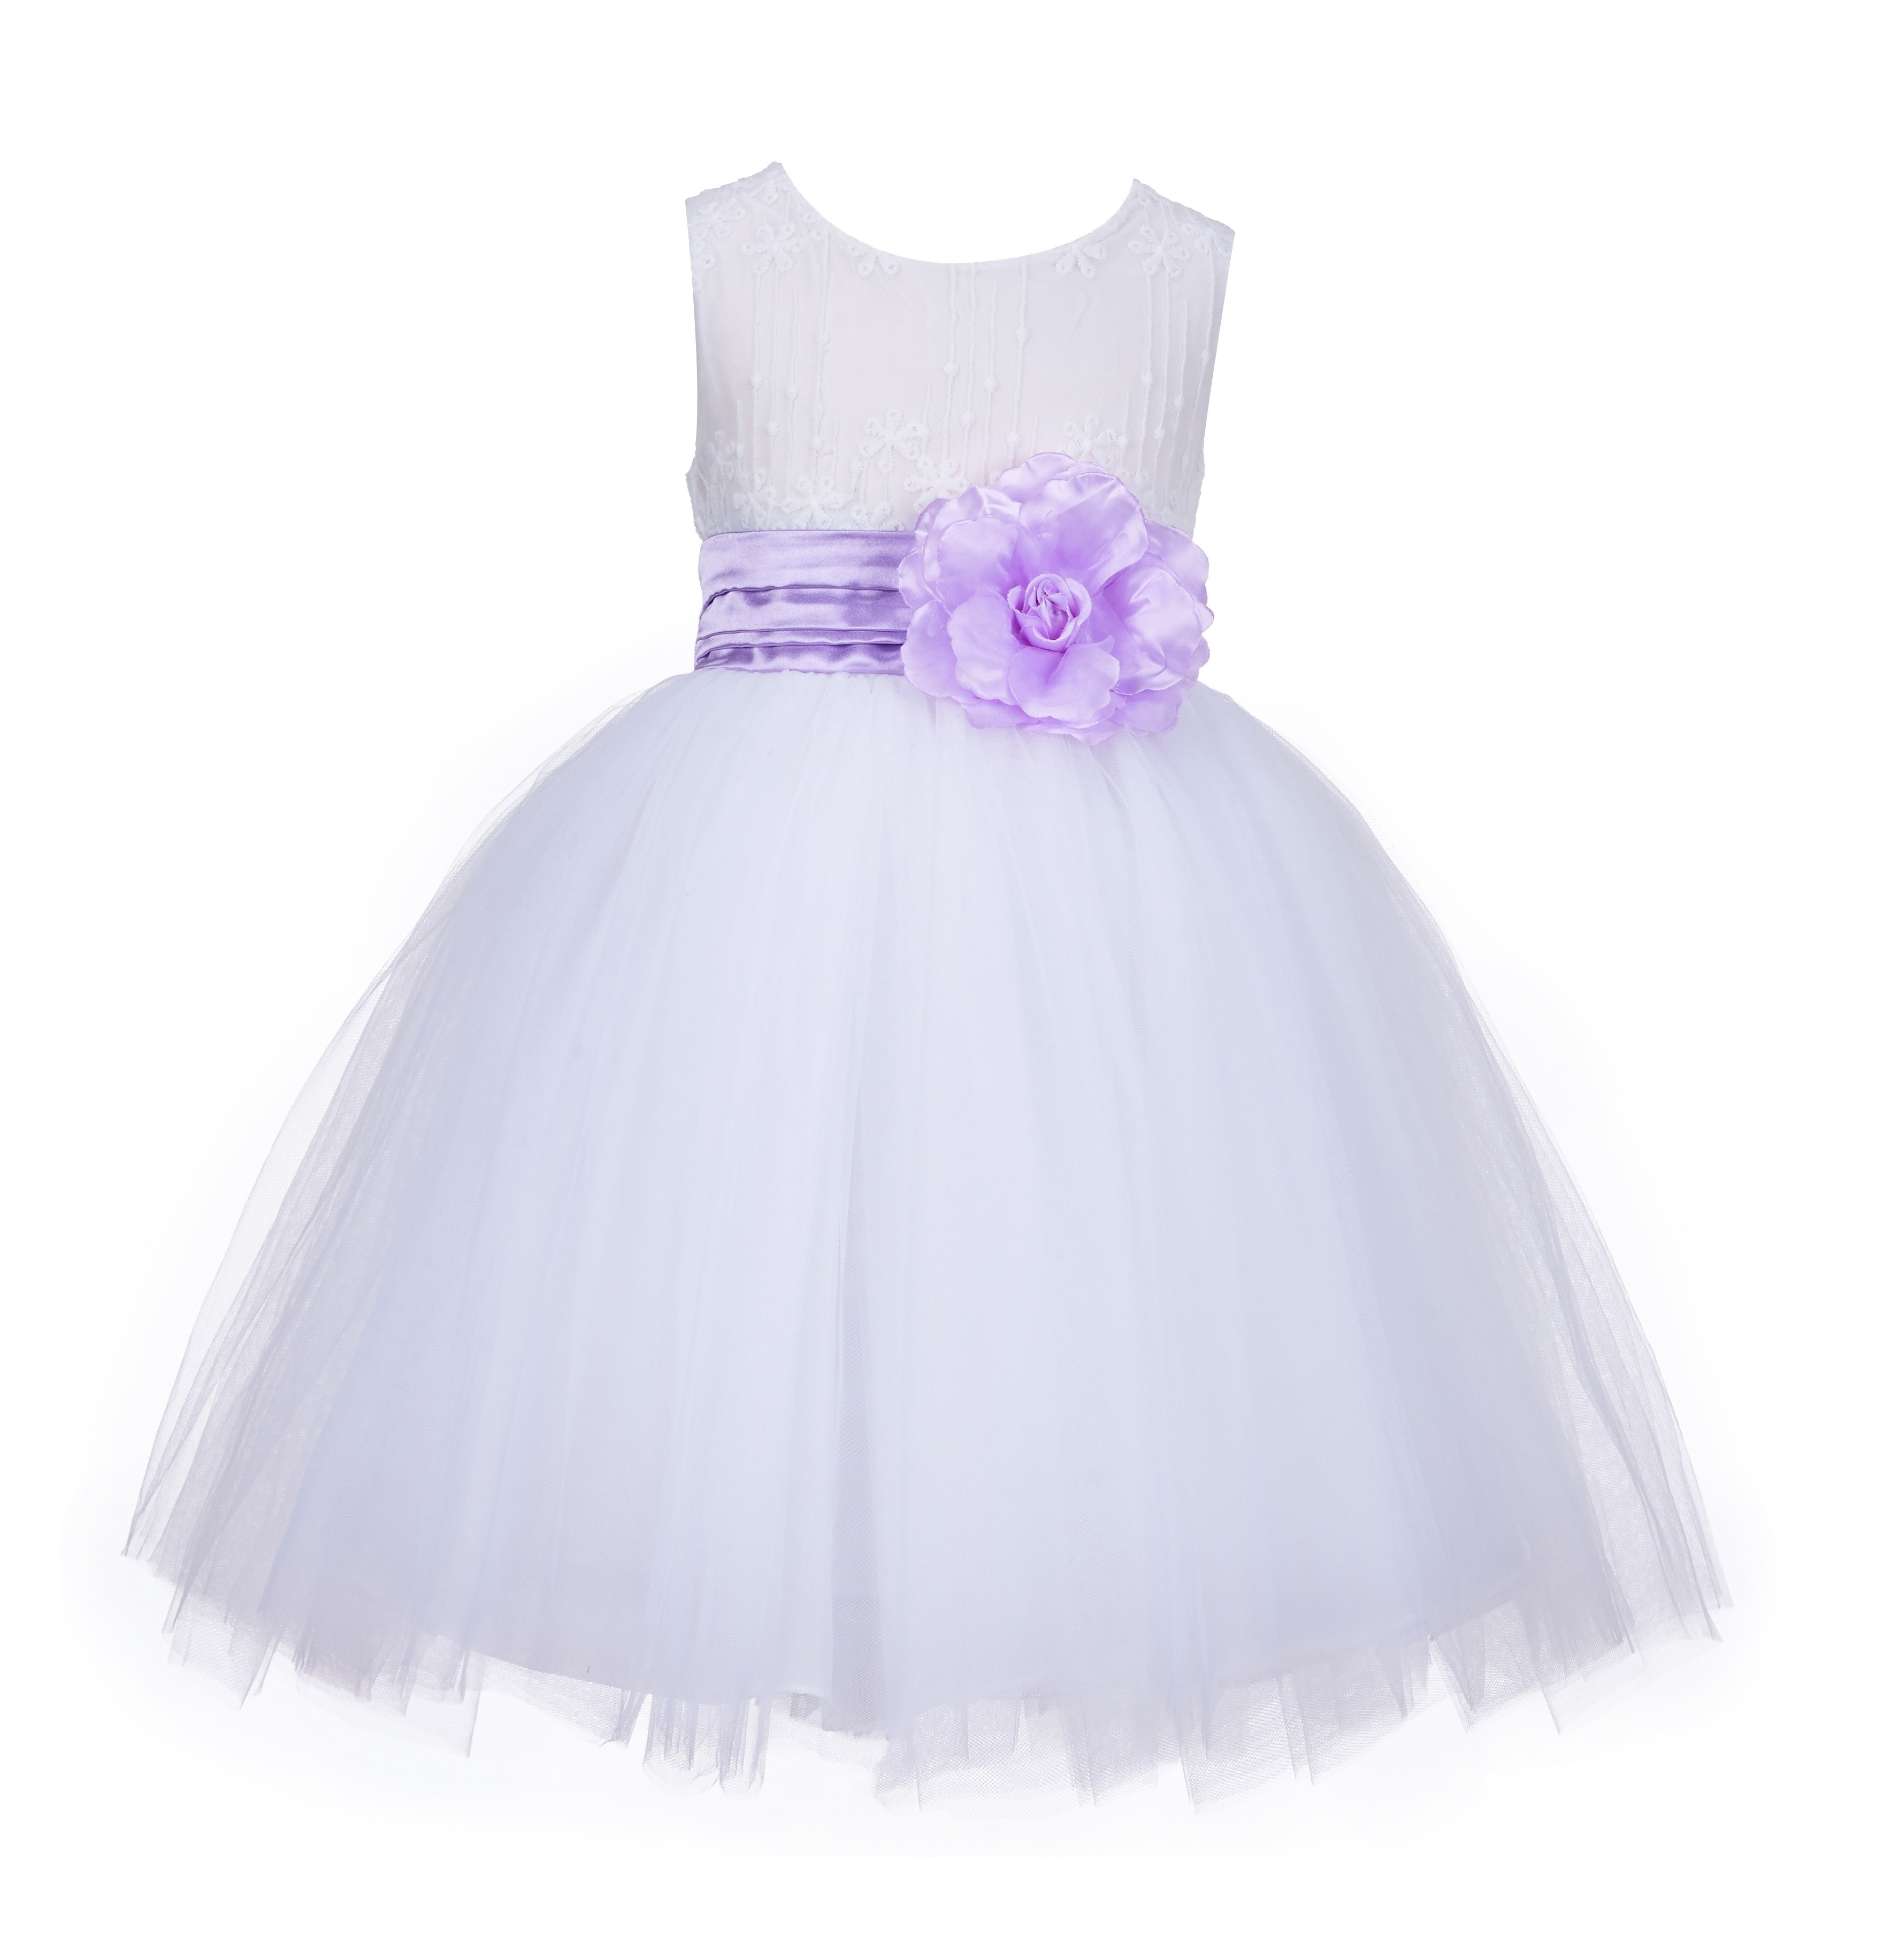 White/Lilac Lace Embroidery Tulle Flower Girl Dress Wedding 118